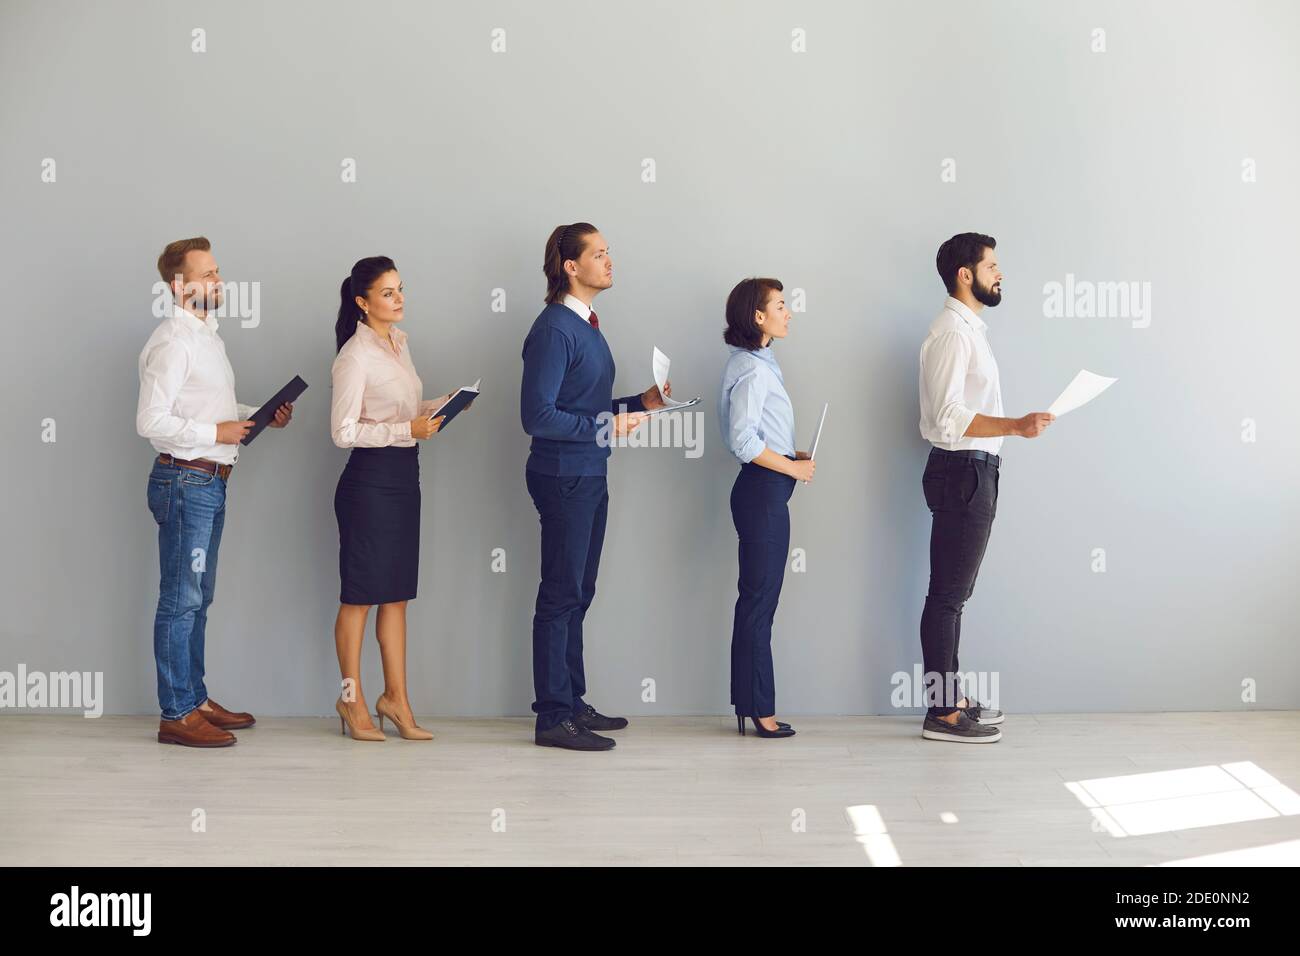 Young candidates for vacancy or job seekers standing in line with resumes and waiting for interview Stock Photo